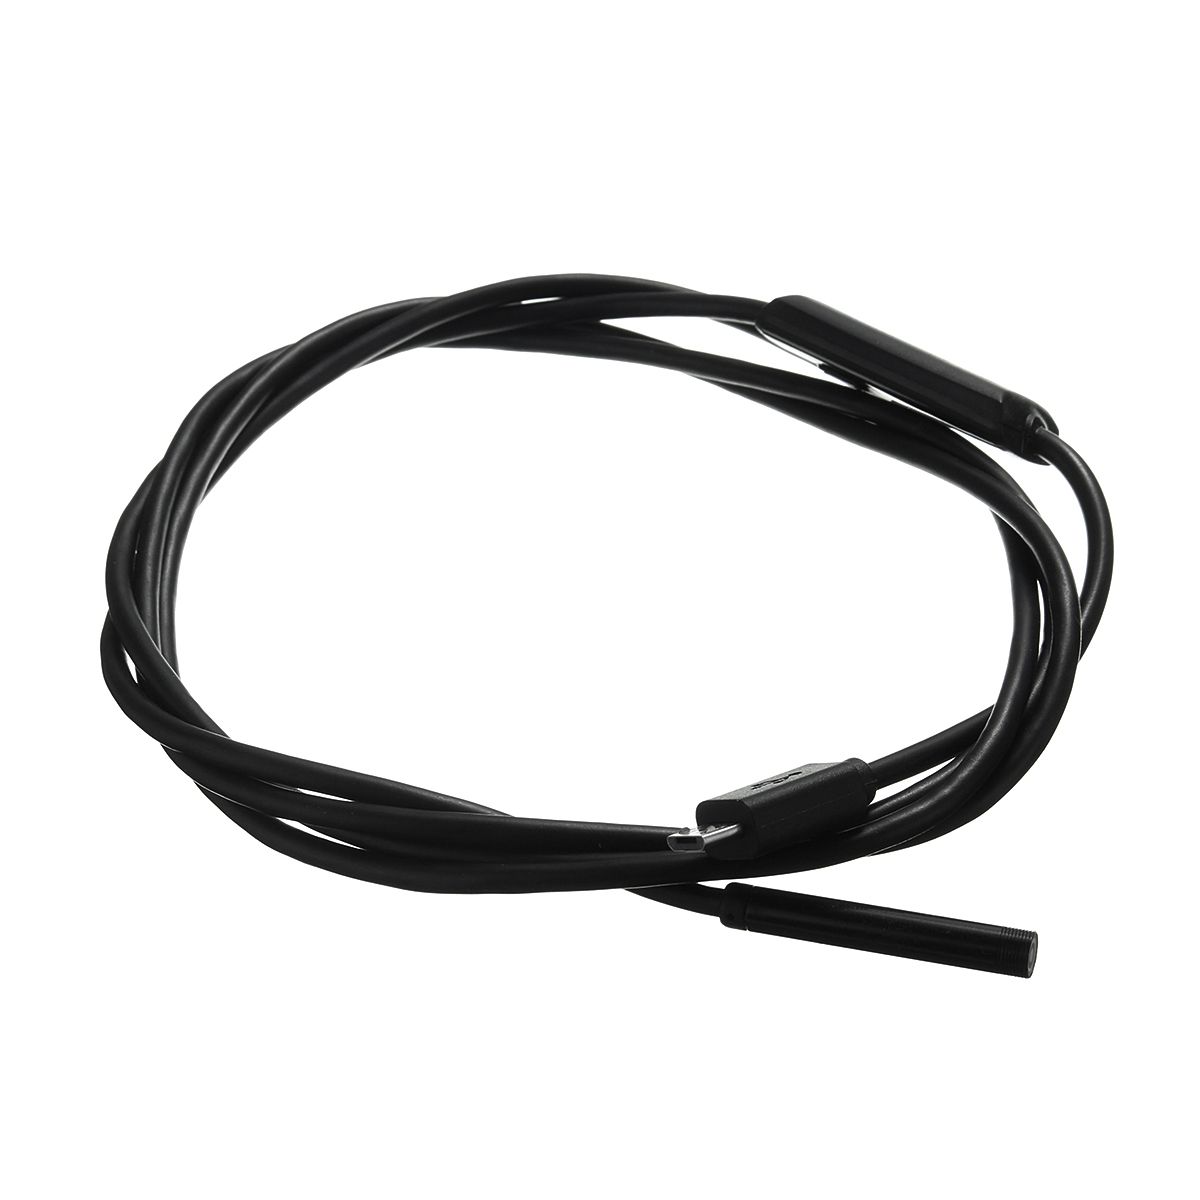 55mm-2m-6-LED-Lens-USB-Camera-Borescope-for-Android-Phone-Laptop-1131973